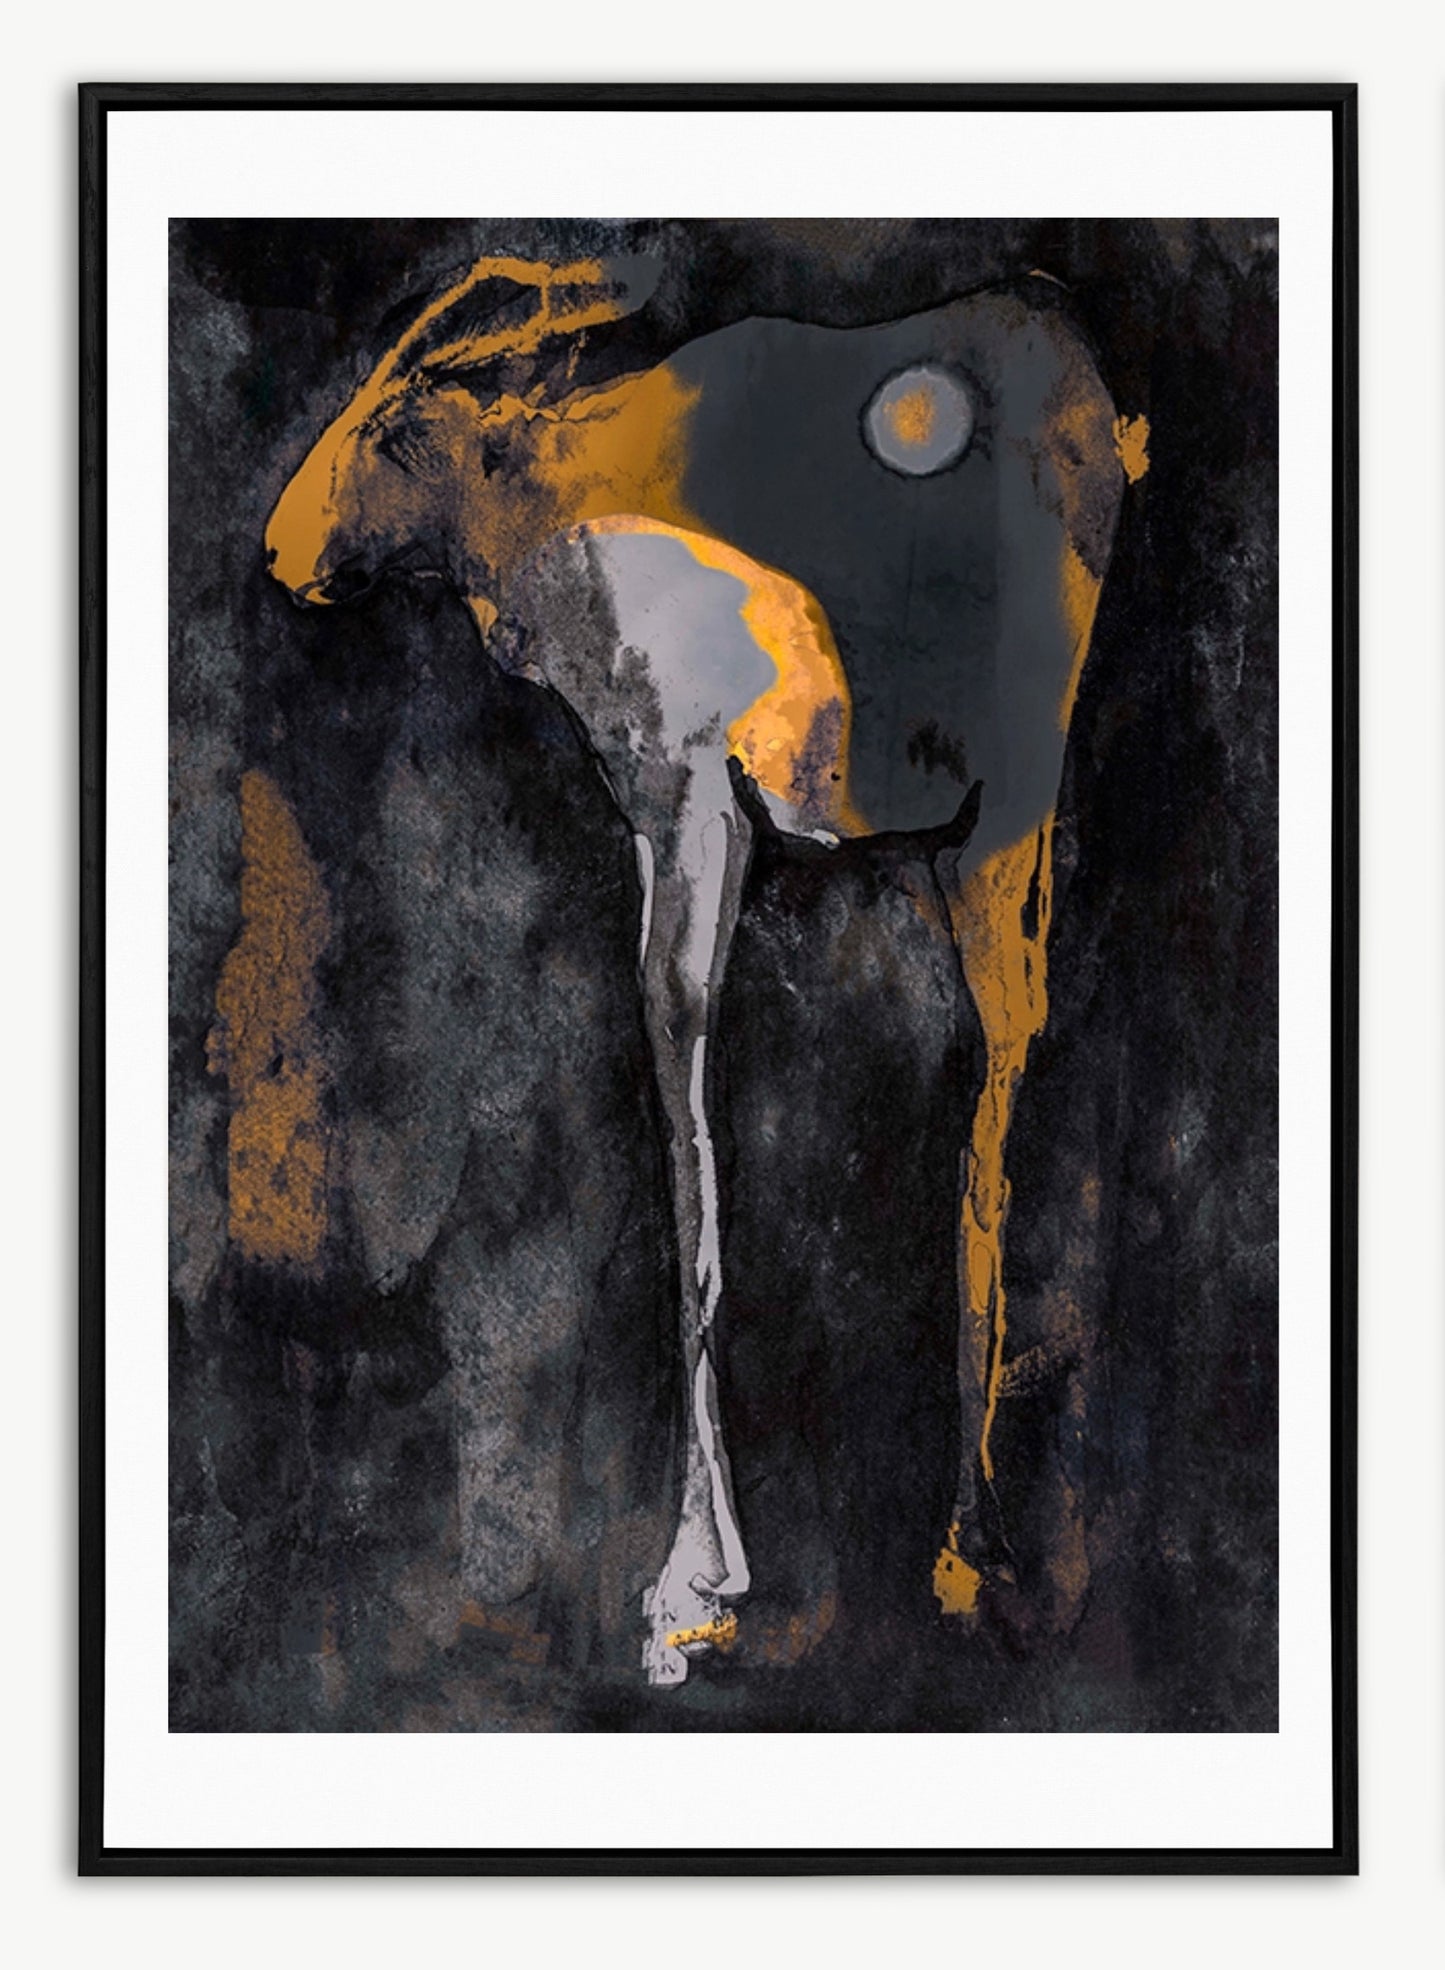 Samtale med månen/Conversation with the moon, limited edition 20 prints